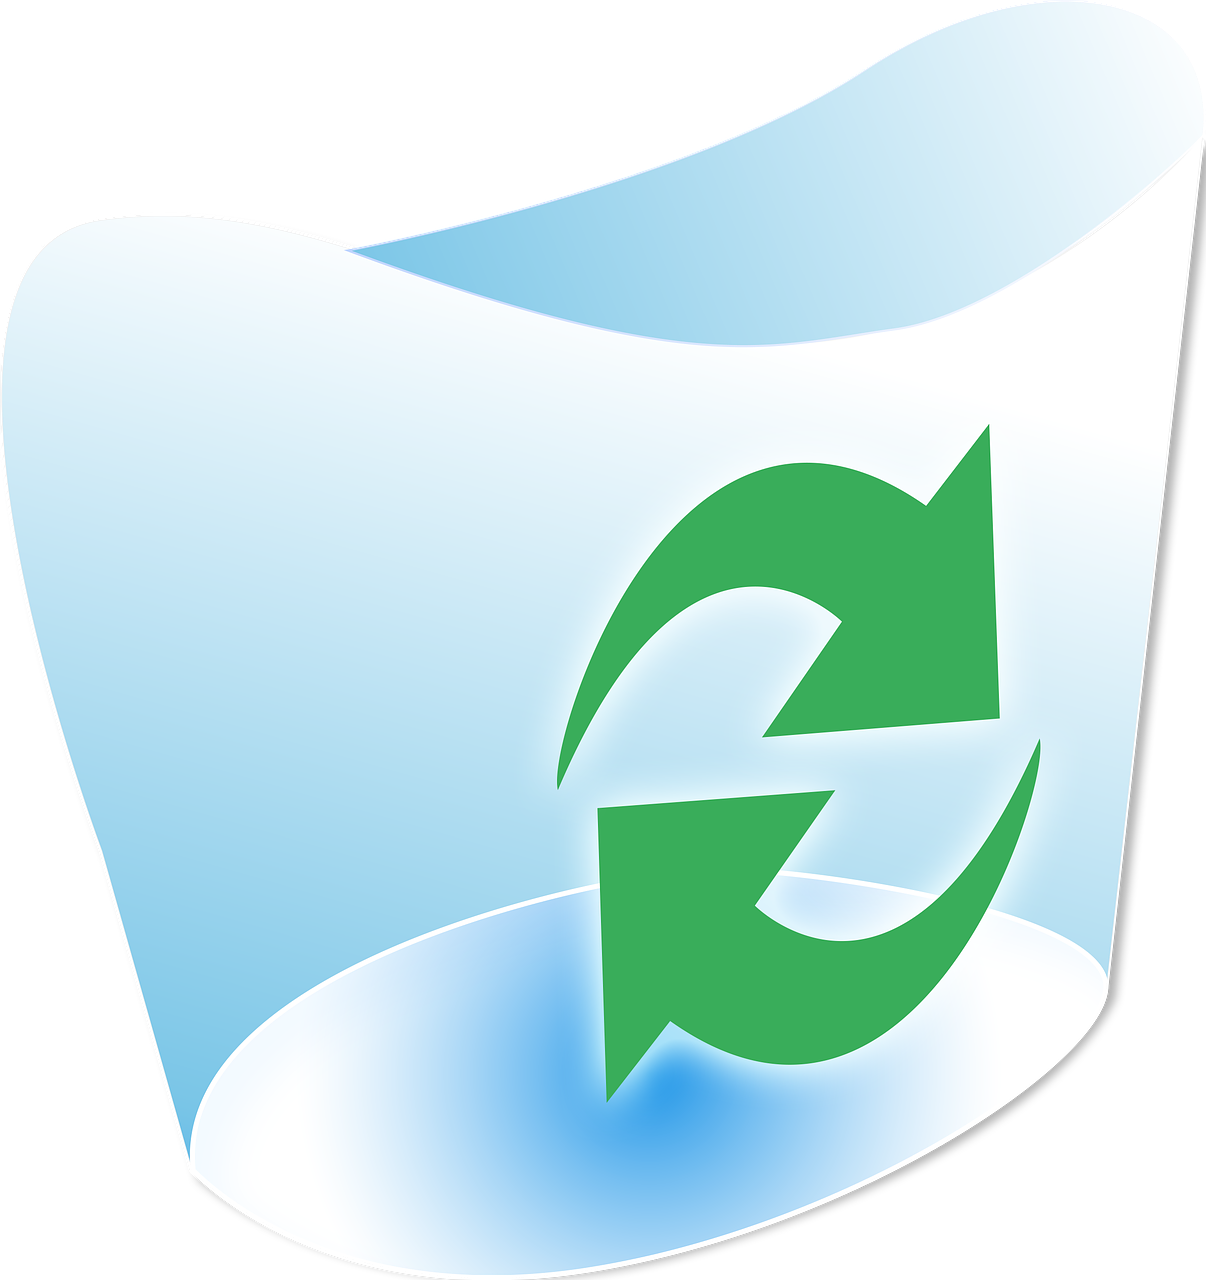 Recycle Bin Logo PNG Background Image